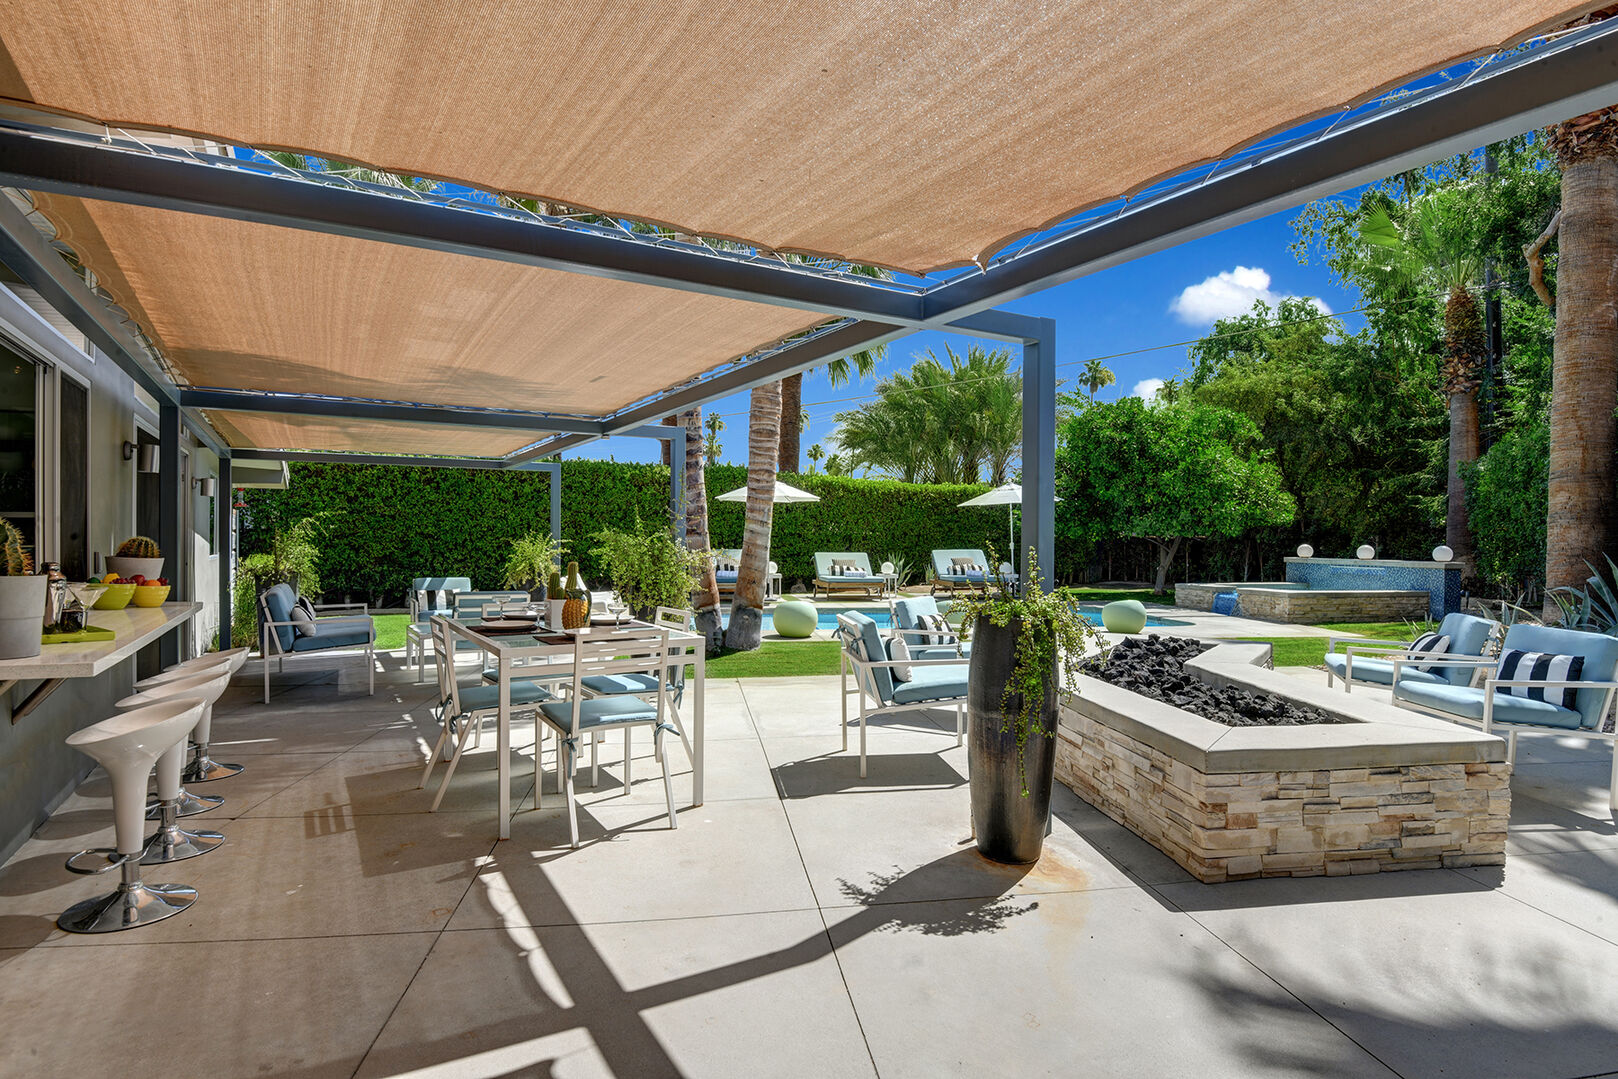 COVERED OUTDOOR DINING SPACE AND FIRE PIT